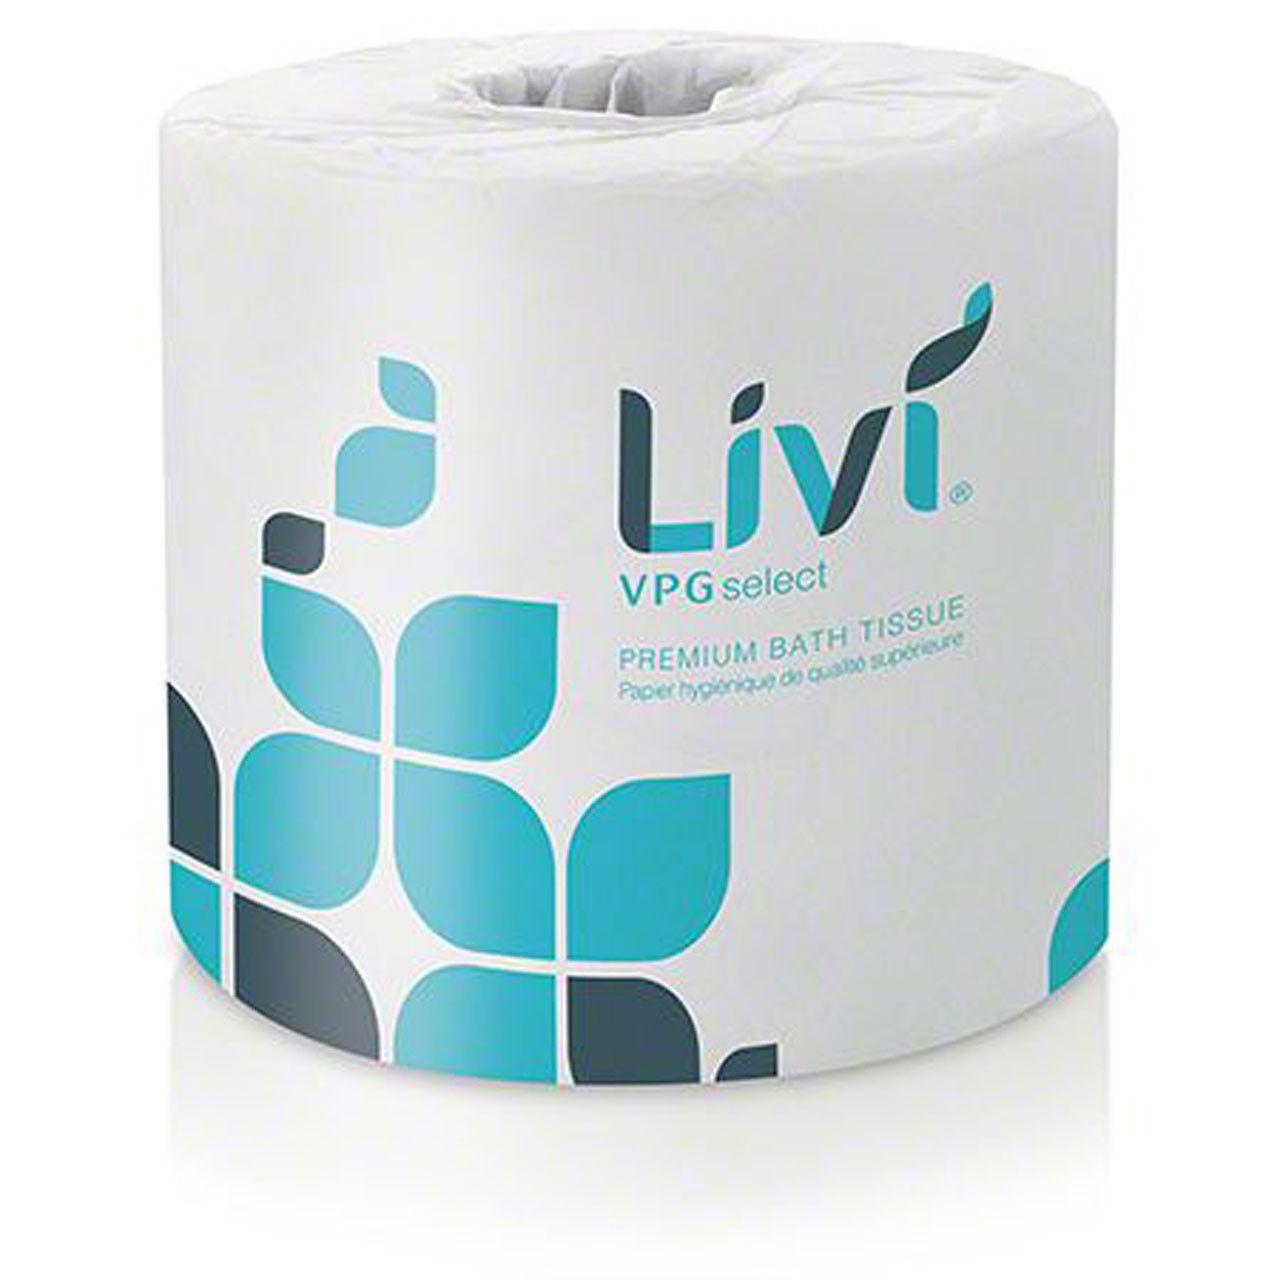 How is the Solaris Paper Livi VPG Select Toilet Tissue 2/ply packaged?